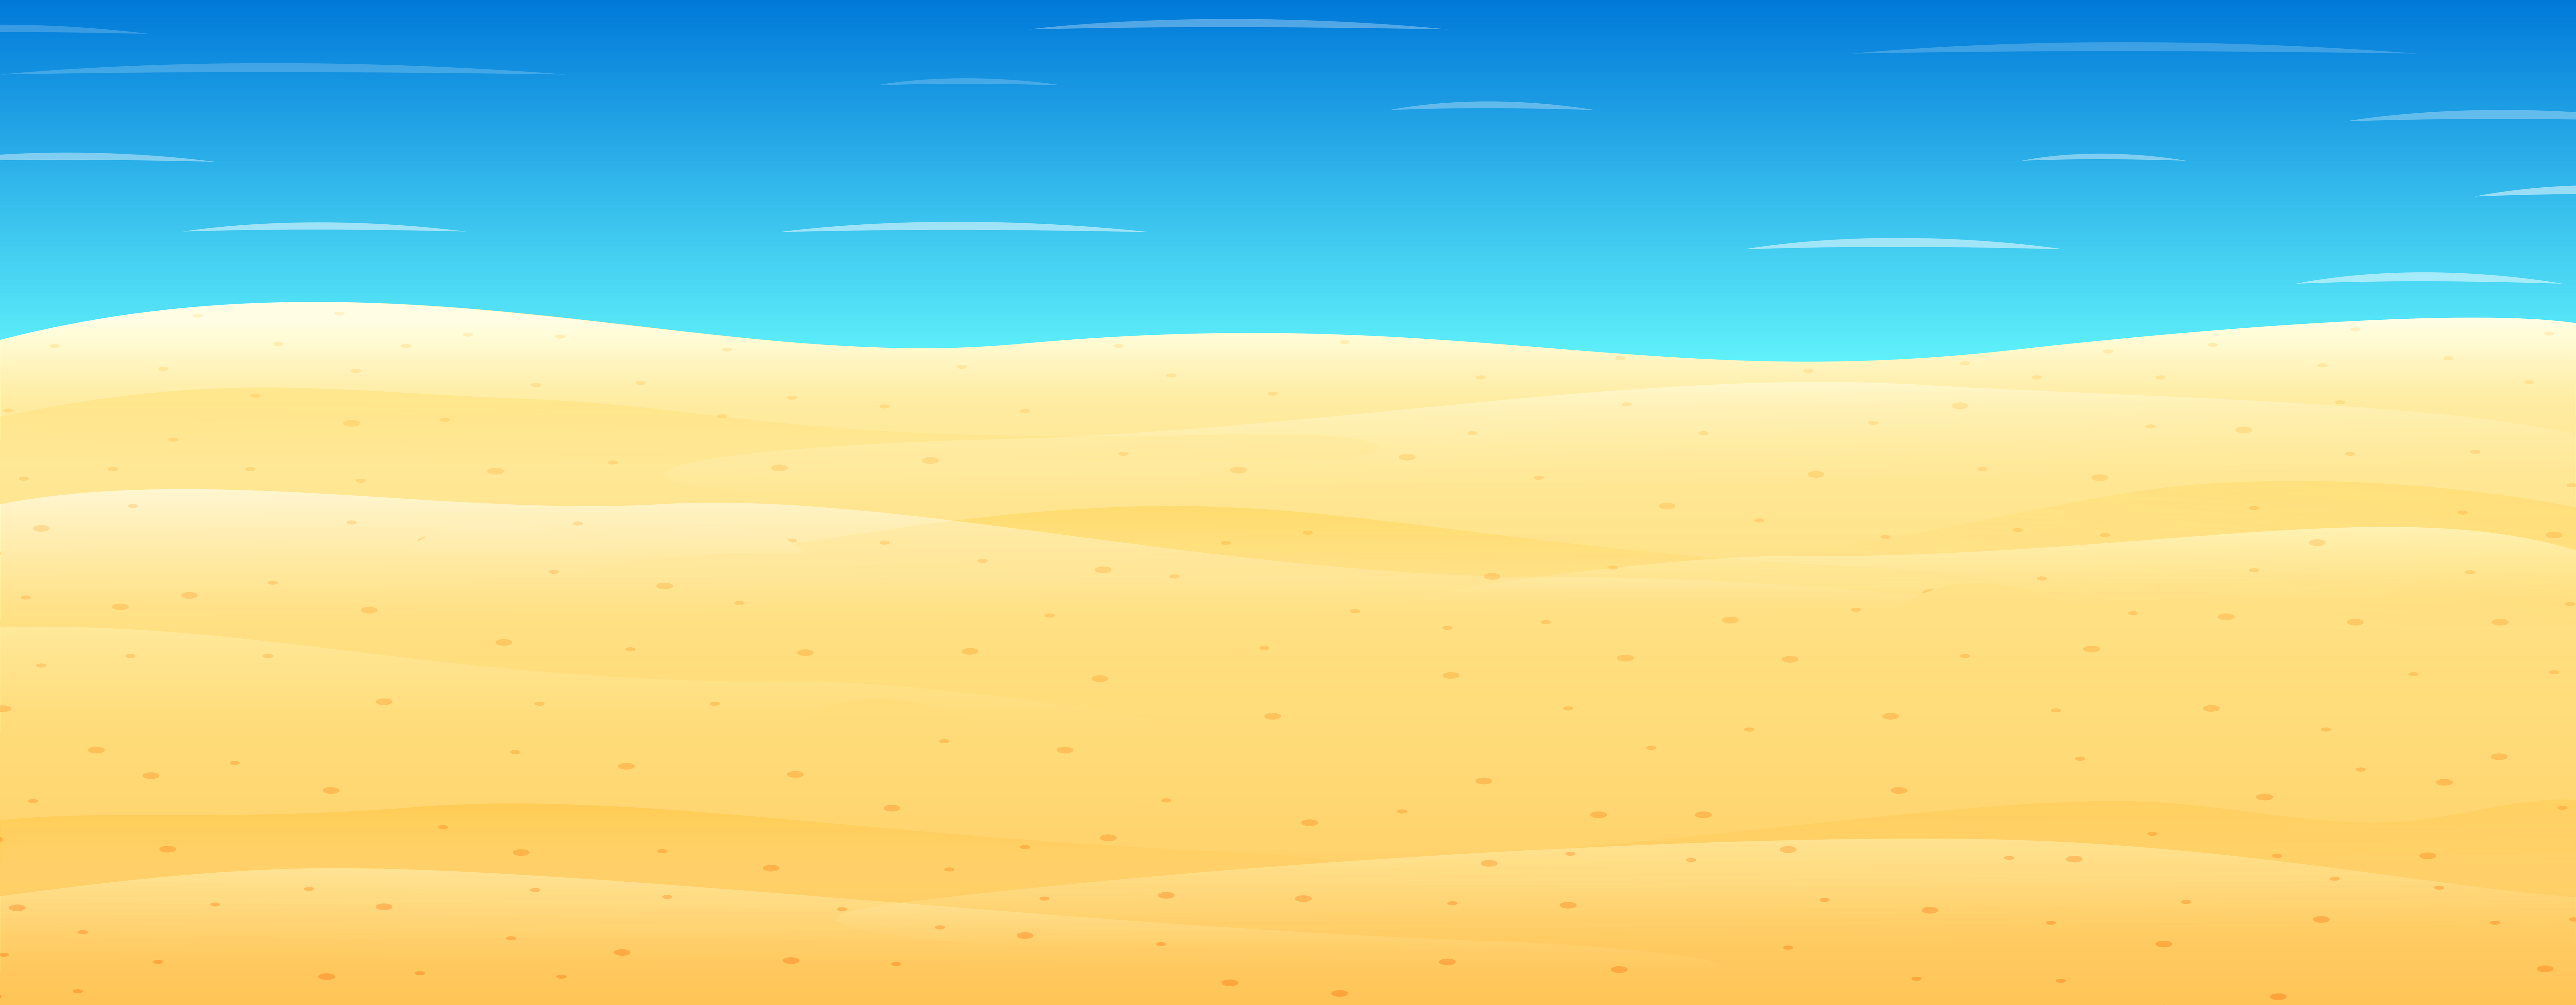 Sea of sand clipart - Clipground